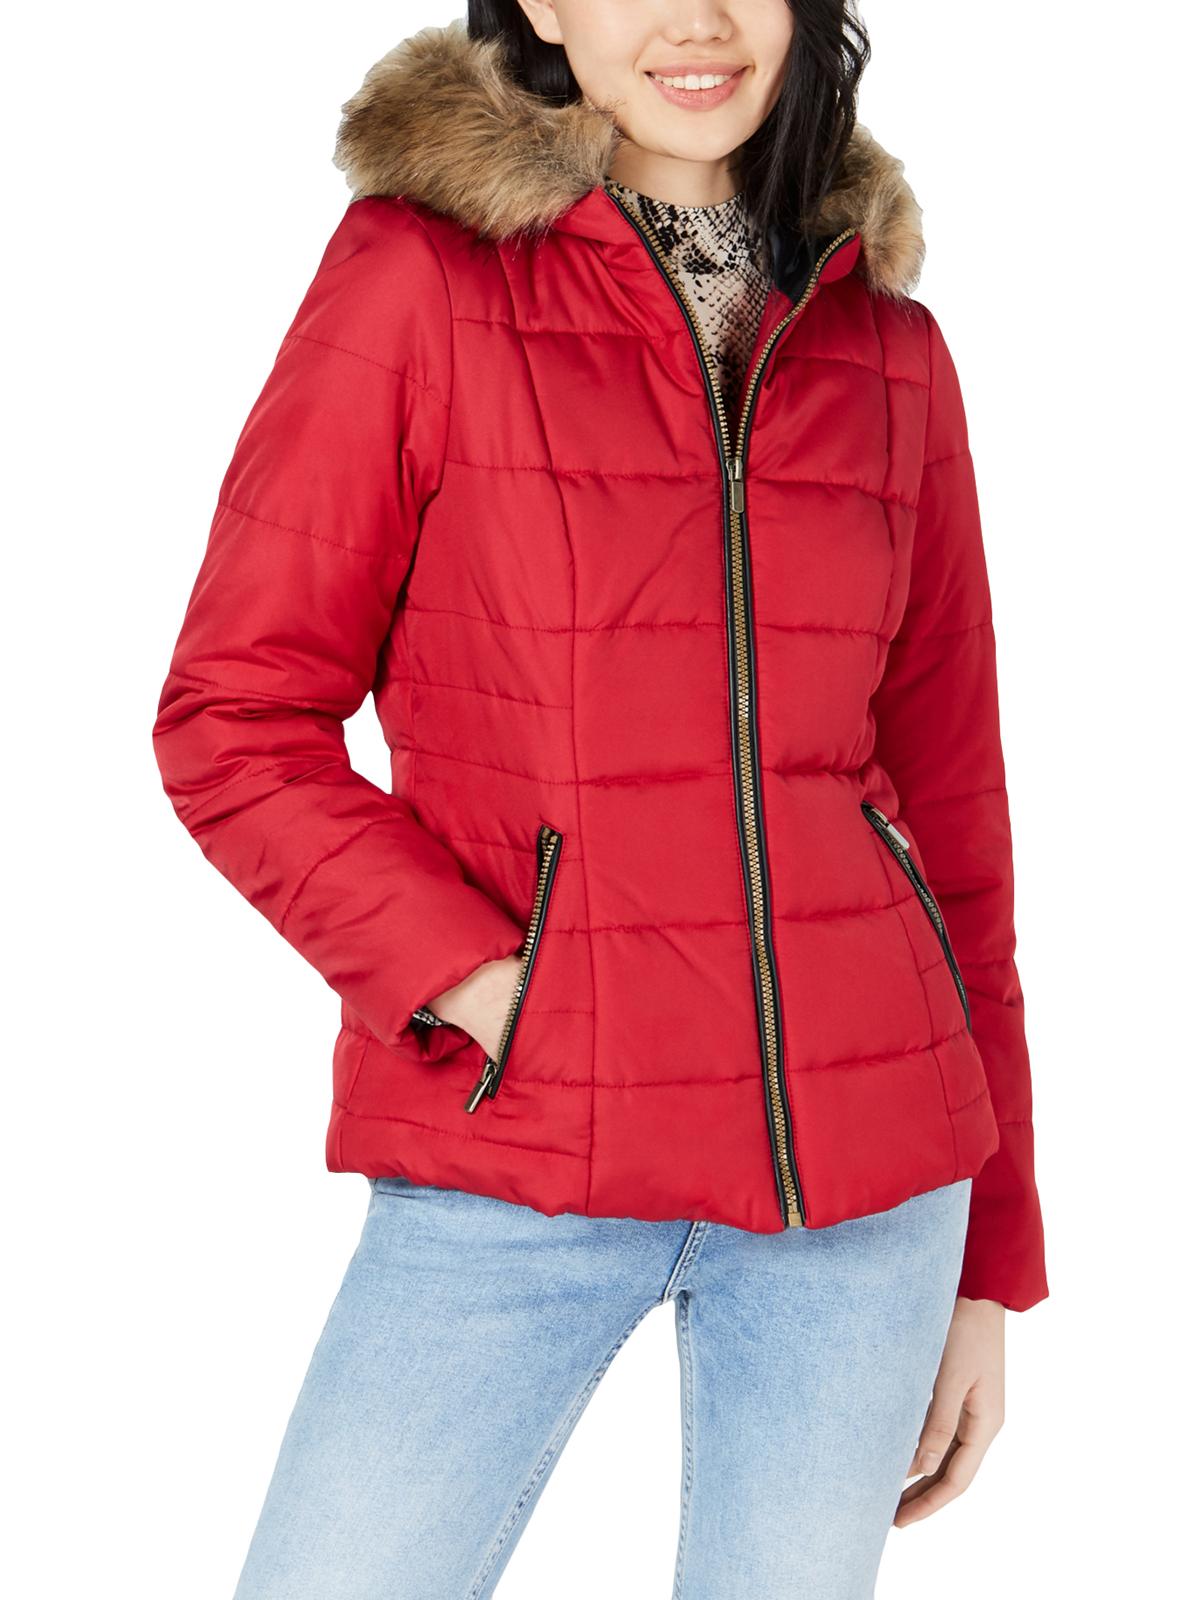 Celebrity Pink Womens Juniors Quilted Short Puffer Coat Red XL - image 1 of 2